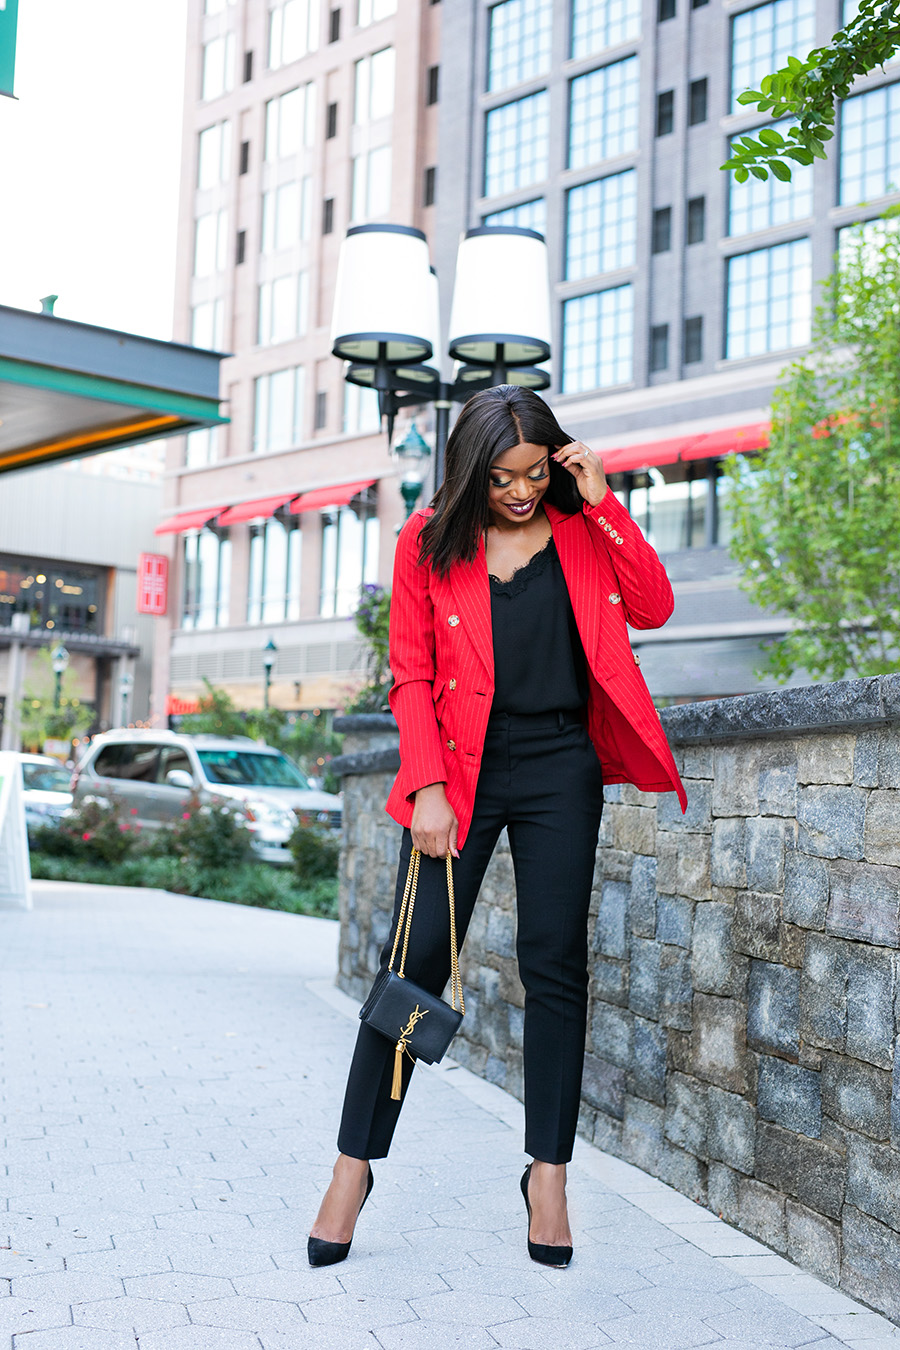 Simple Ways To Wear Power Suit This Fall - Jadore-Fashion